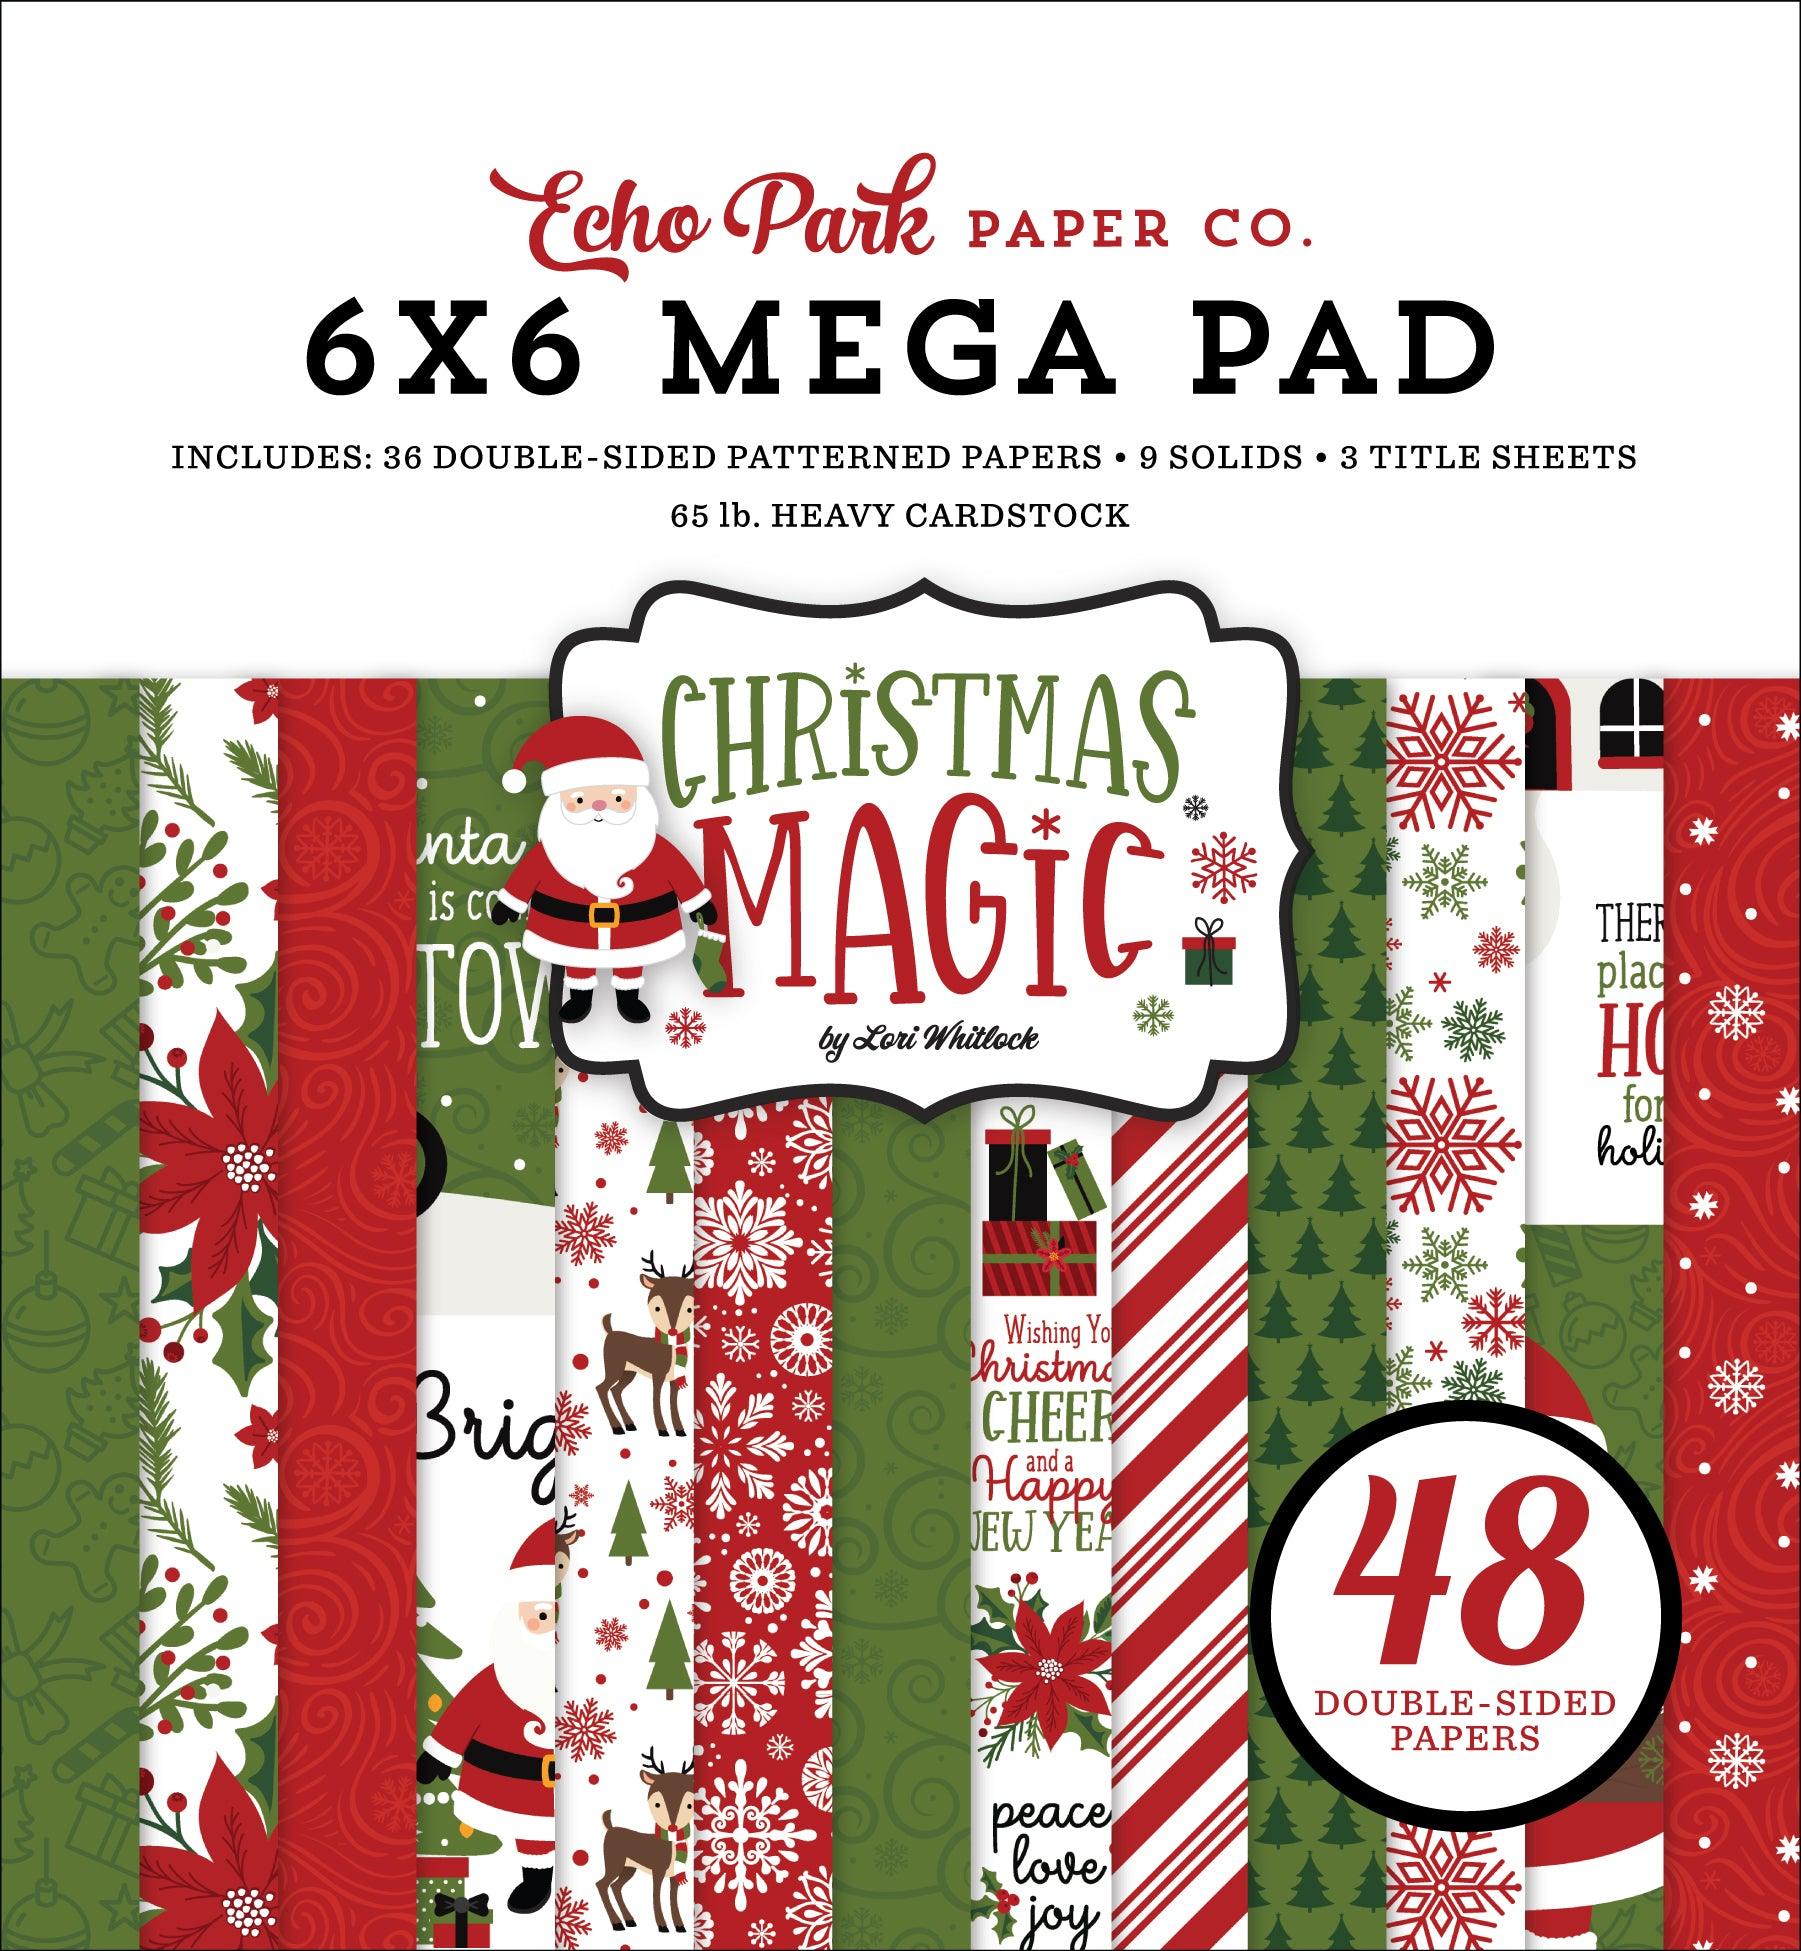 Christmas Magic Collection 6 x 6 Mega Paper Pad by Echo Park Paper - 48 Double-Sided Papers - Scrapbook Supply Companies